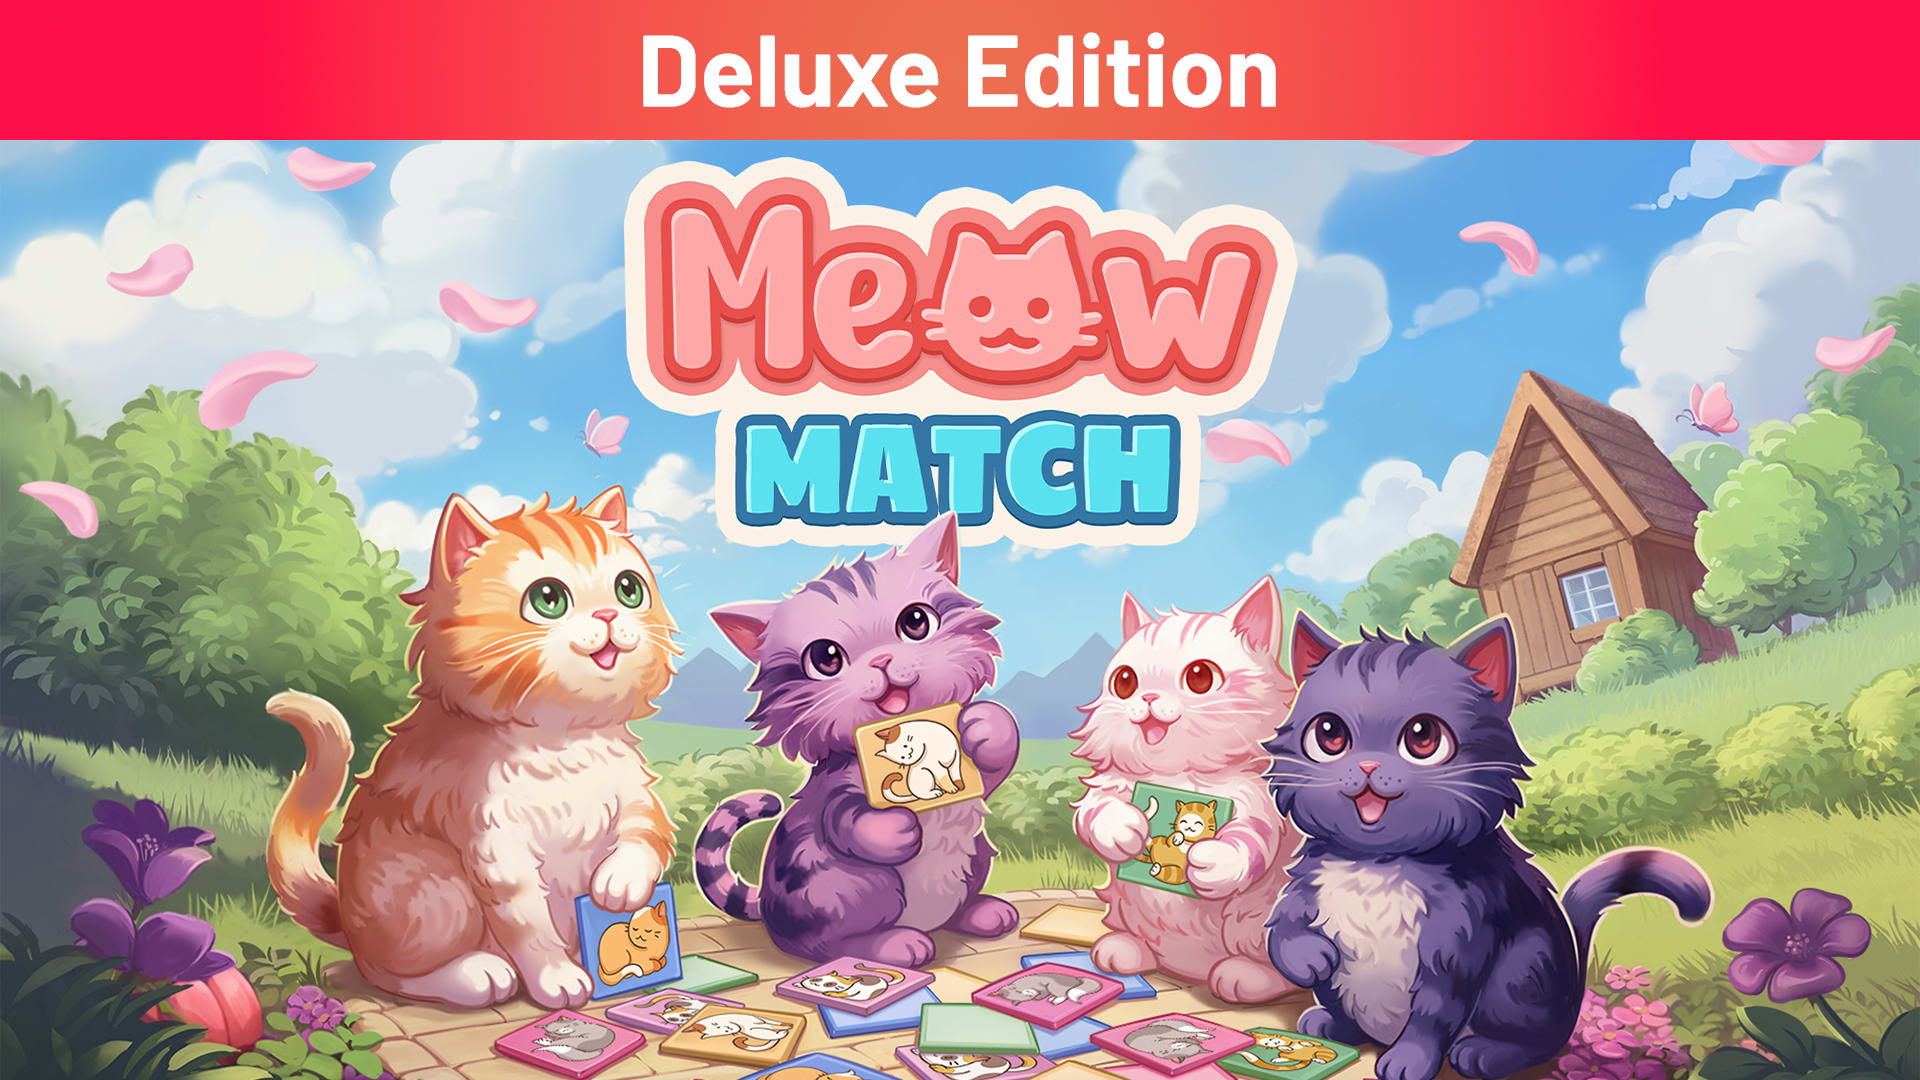 Meowmatch Deluxe Edition 1